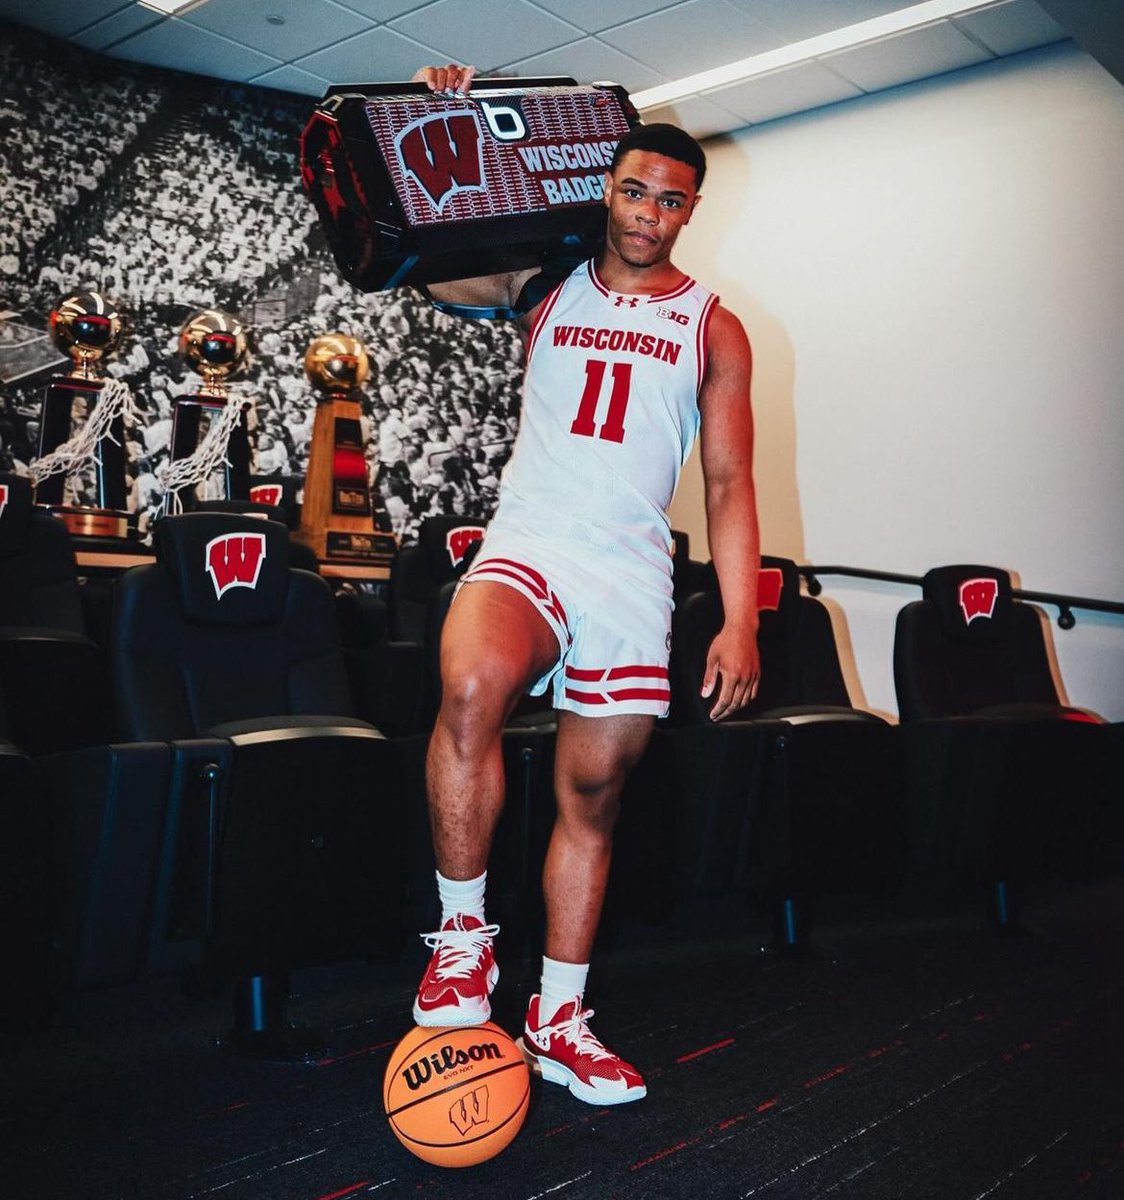 NEWS: Central Arkansas transfer Camren Hunter has committed to Wisconsin he tells @247SportsPortal Hunter averaged 16.9 points, 5.0 rebounds, and 3.9 assists during 2022-2023 season. “I’m excited and ready to get to work” Story: 247sports.com/college/basket…